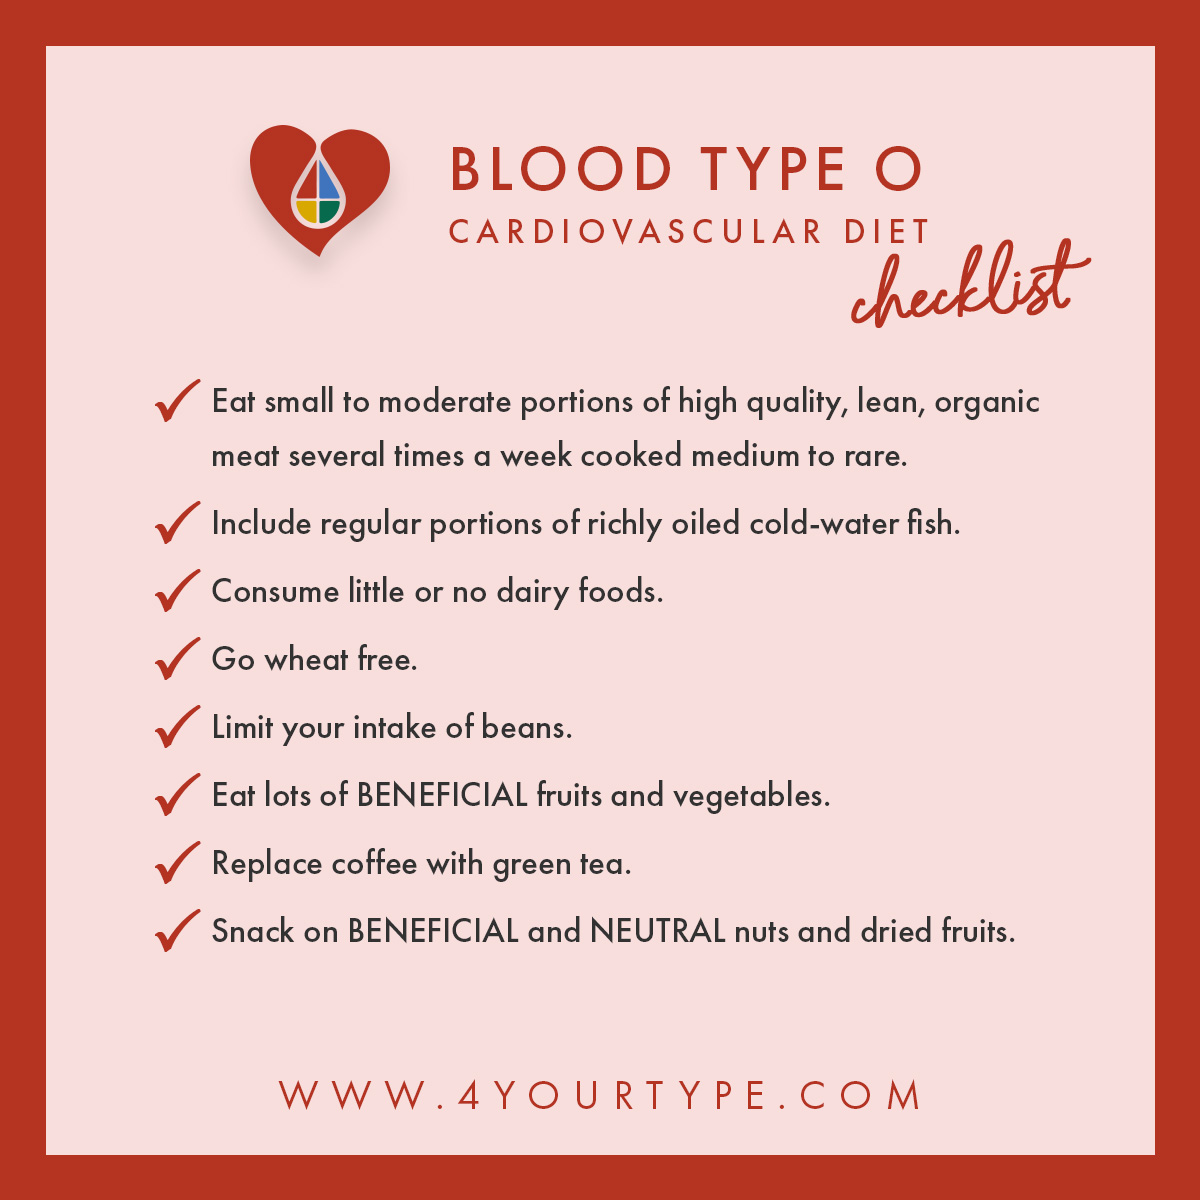 Heart healthy foods blood type checklist O